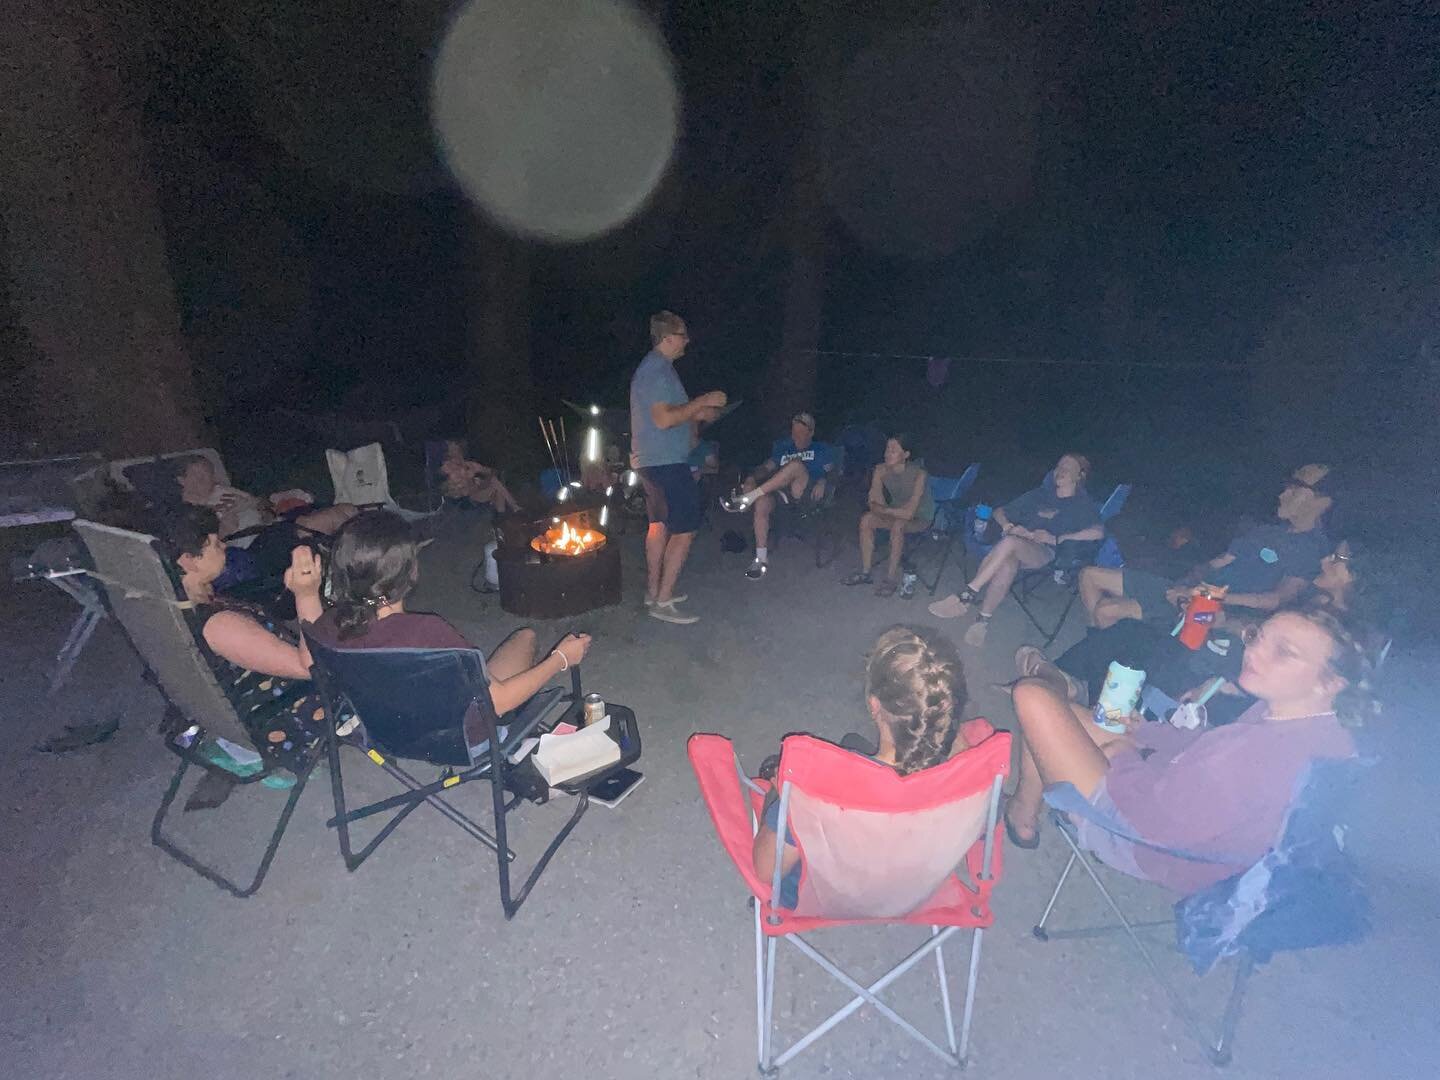 Some delayed Pictures from our teen camp out!  They had a great time together even with the wind and eventually the smoke. Great discussions. Big thanks to the McKinneys, Sheldons and Browns for making it possible!!!